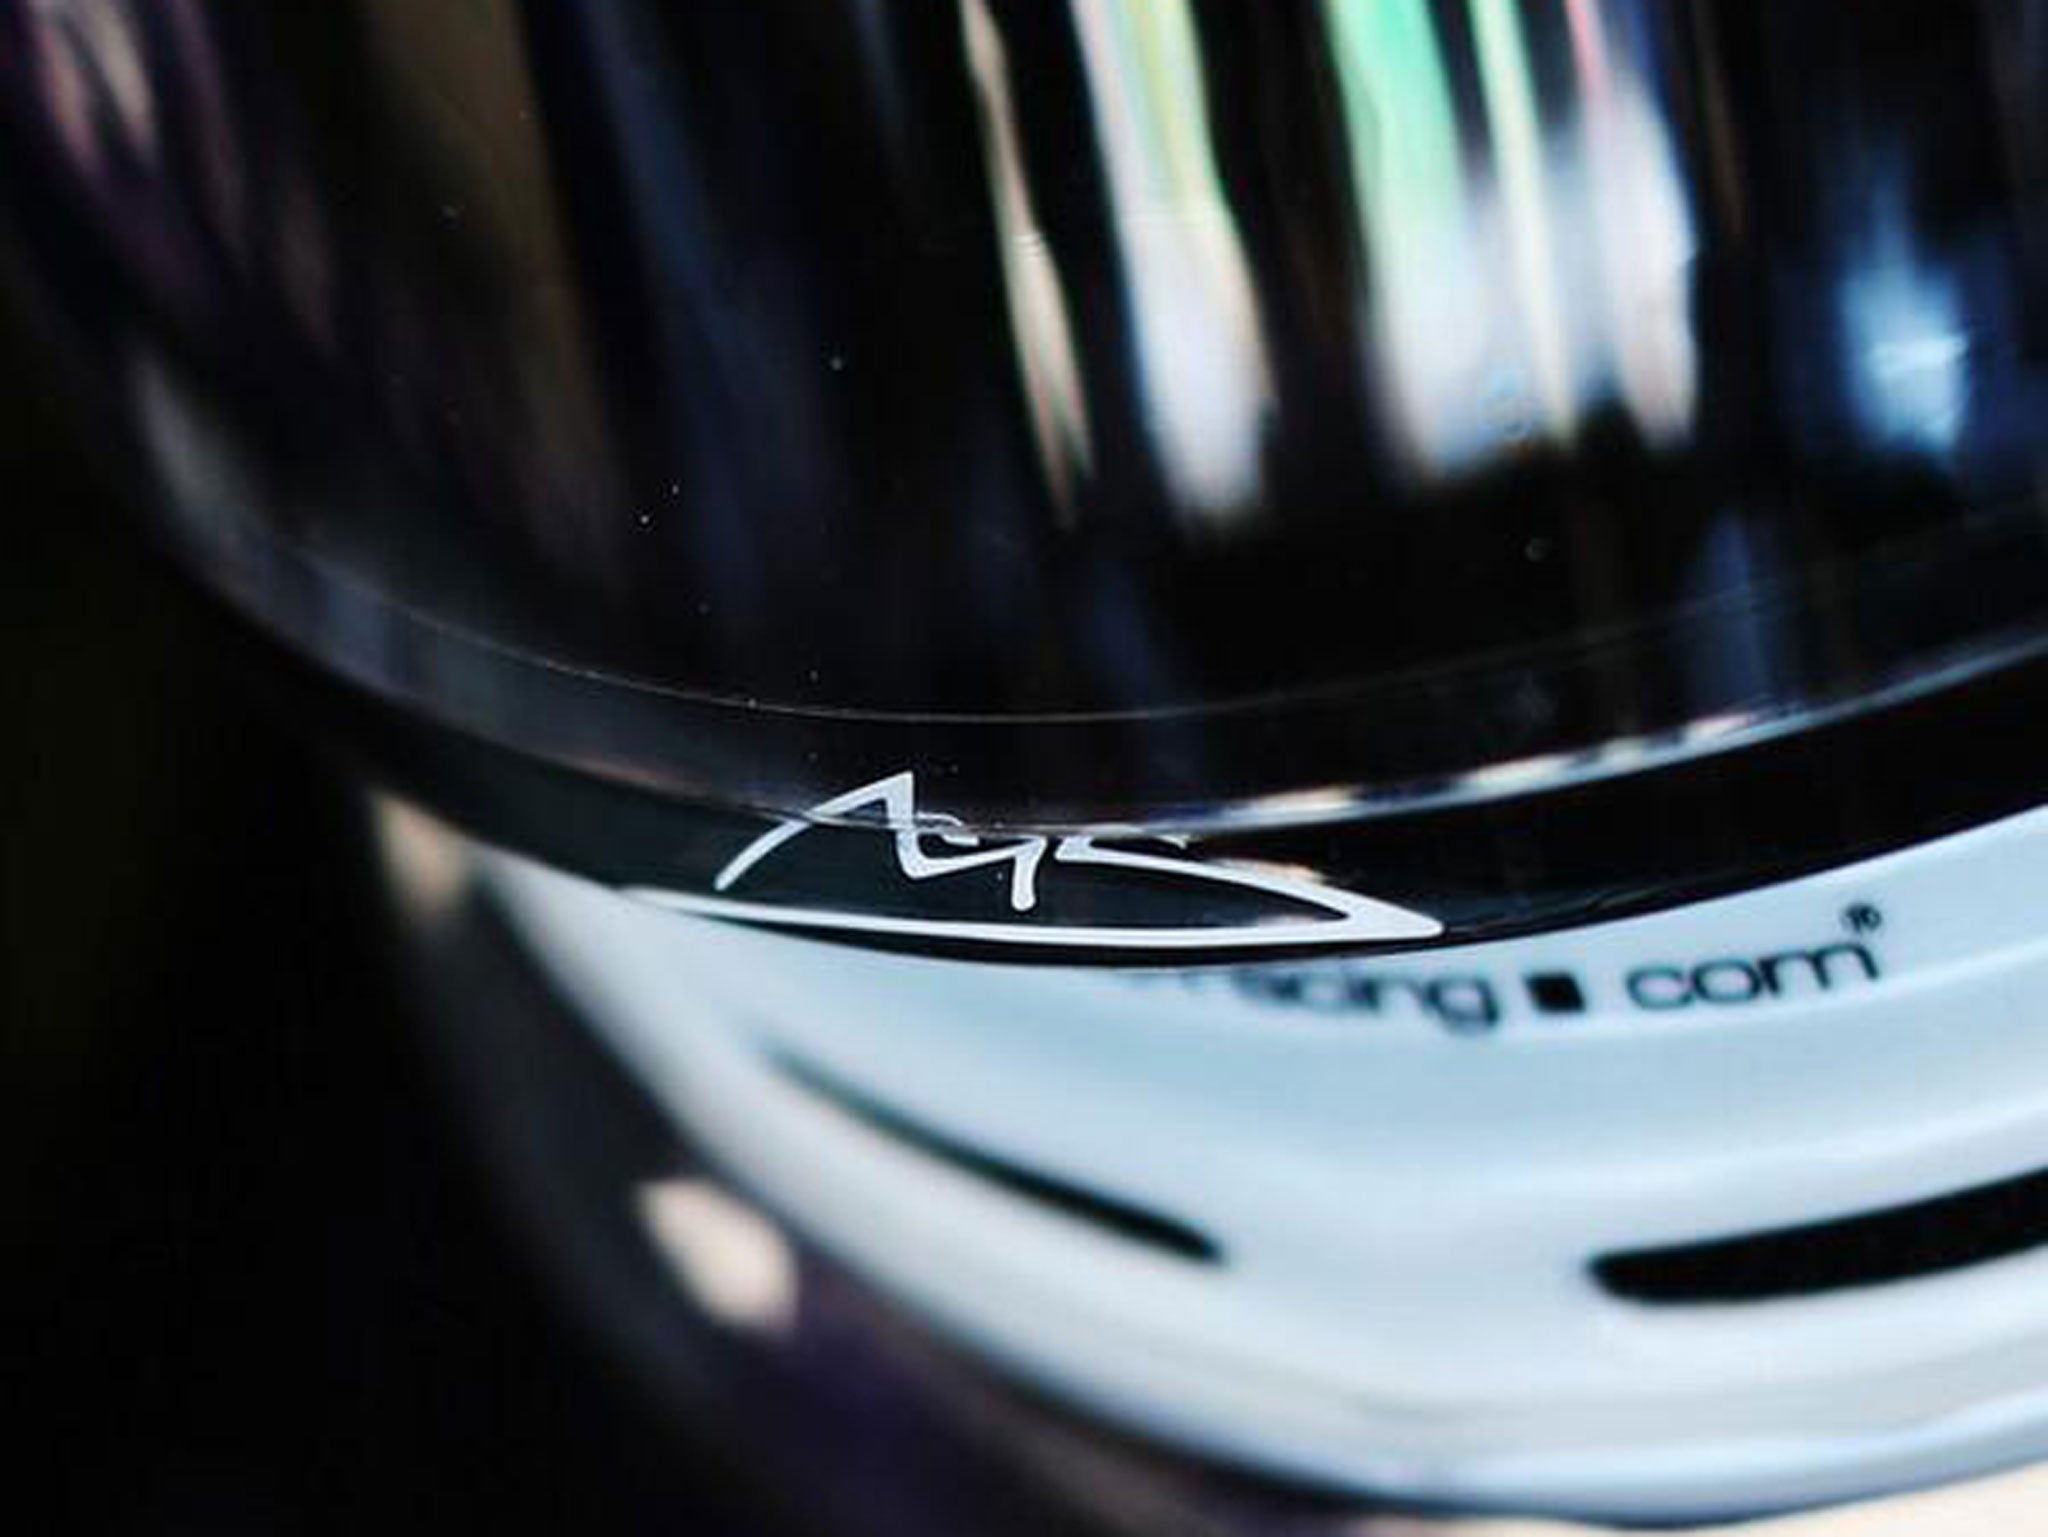 Sebastian Vettel pays tribute to Schumacher by putting his signature on the visor of his helmet